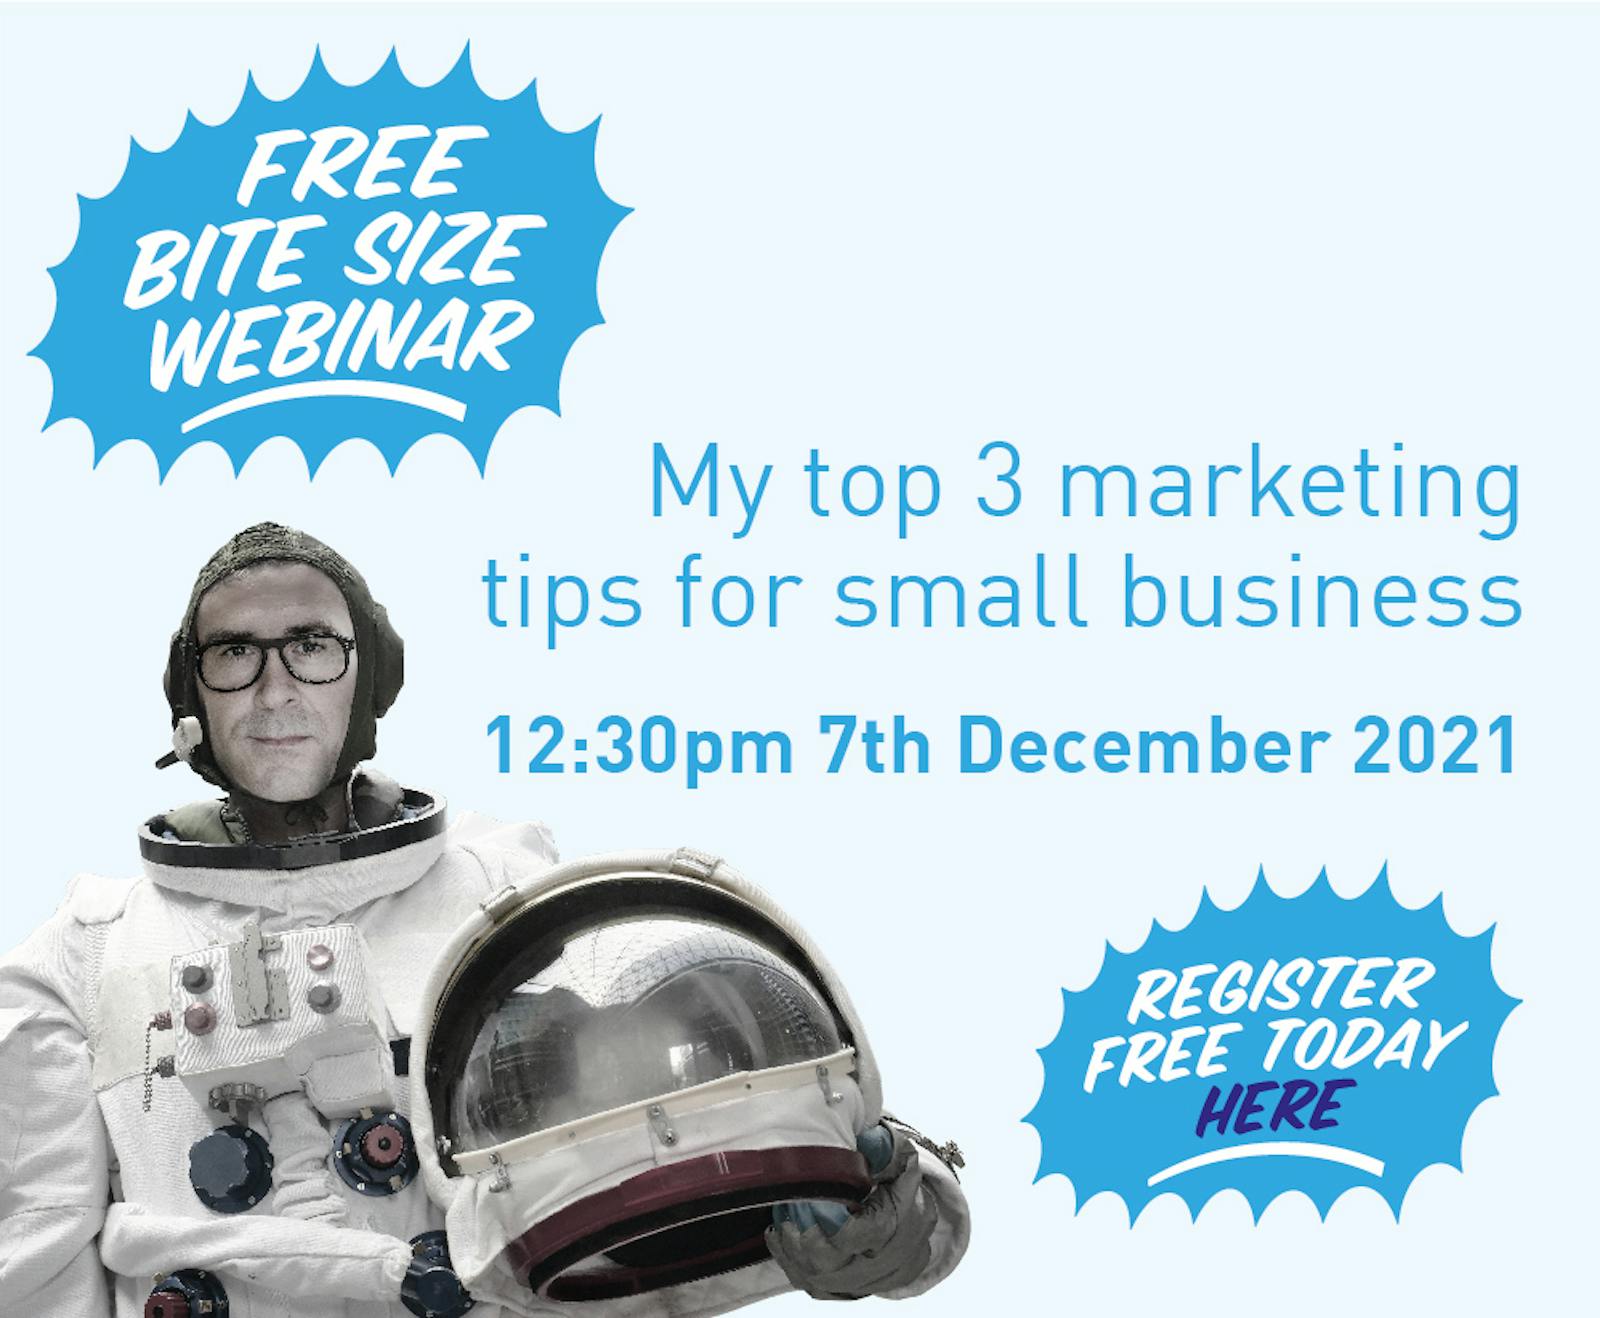 My top 3 marketing tips for small businesses